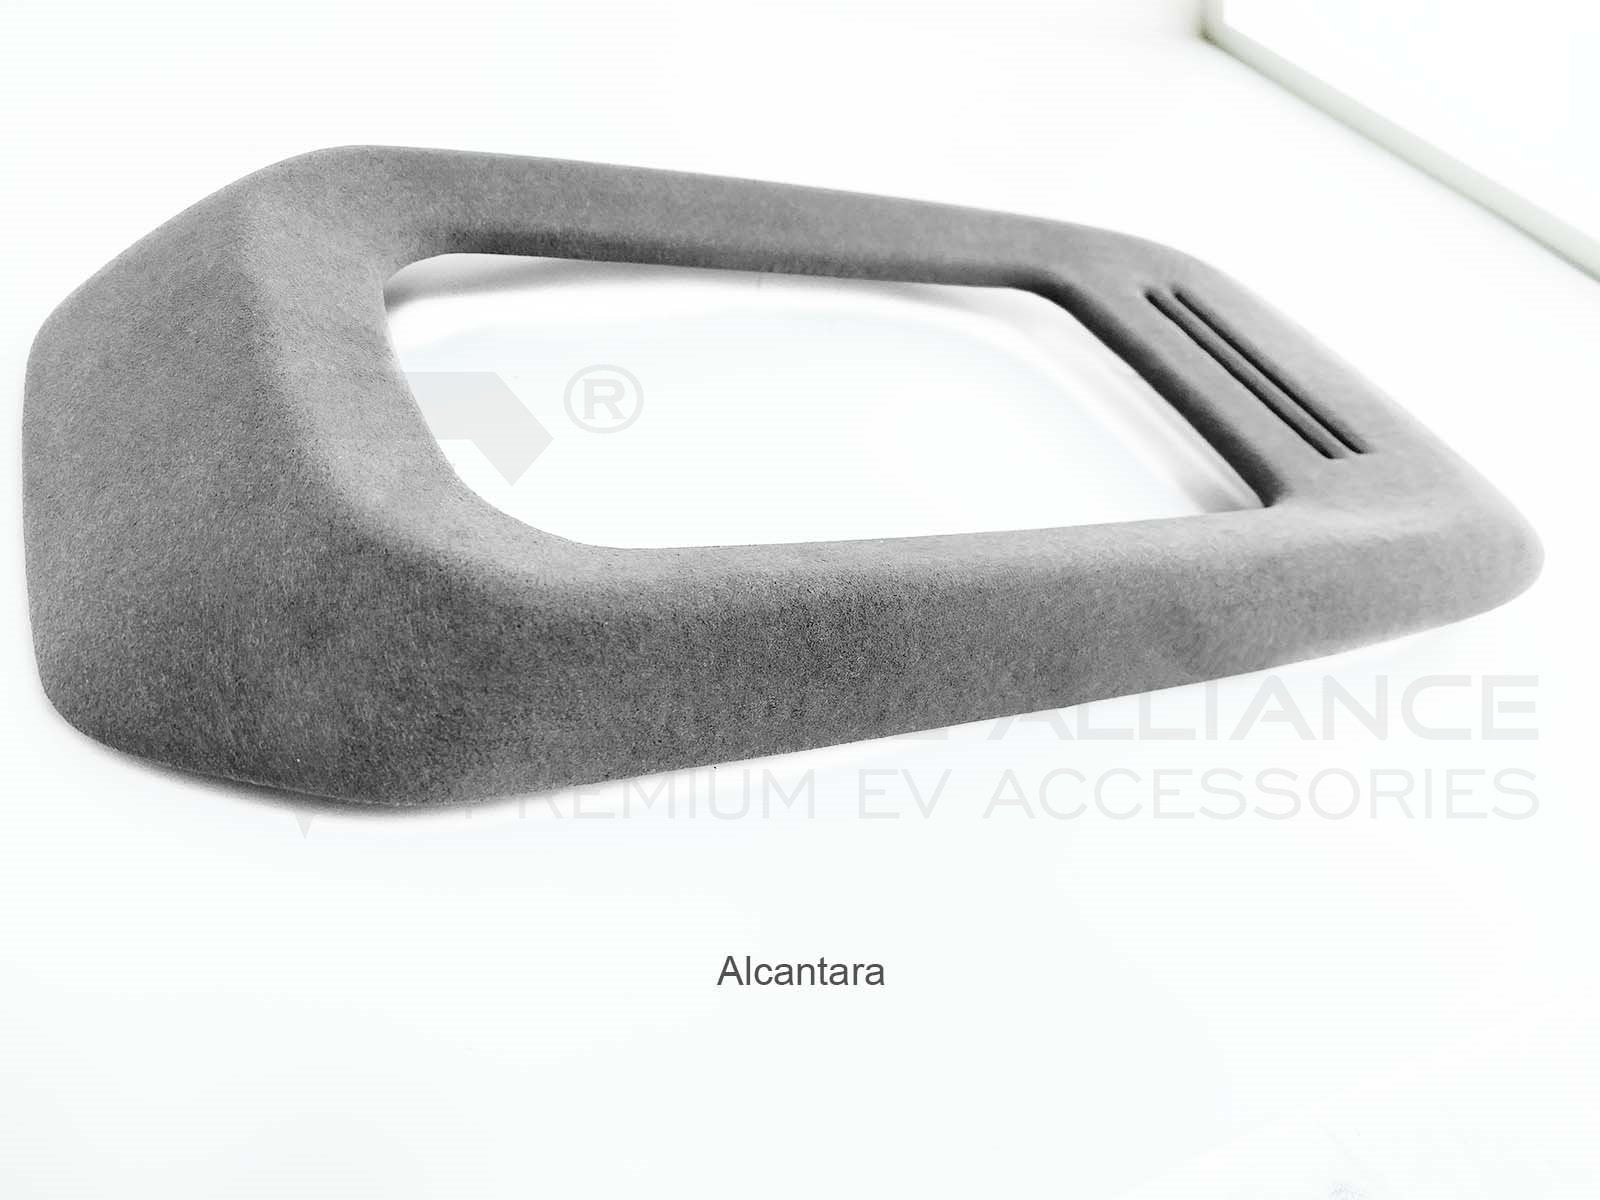 VW ID 4, VW ID.5: ALCANTARA Center Console Cover, Middle Console Decal Trim - Torque Alliance